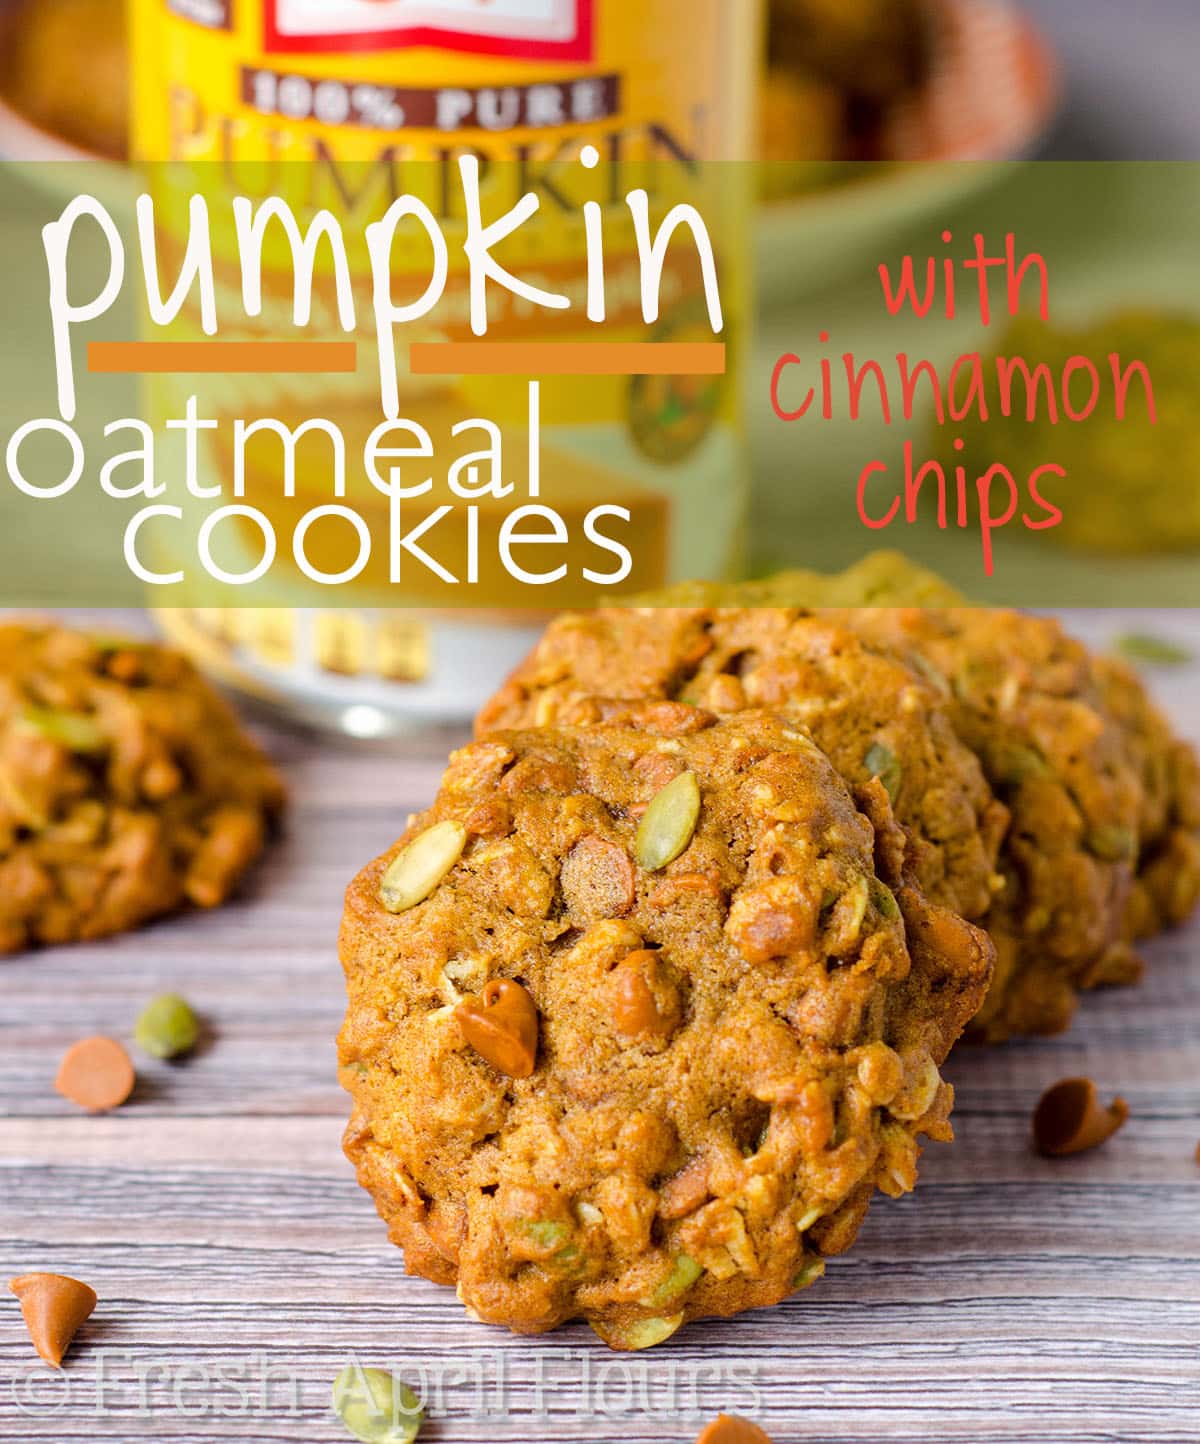 Oatmeal cookies get a fall makeover! These cookies are packed with real pumpkin, warm spices, crunchy pepitas (pumpkin seeds), and sweet cinnamon chips. via @frshaprilflours